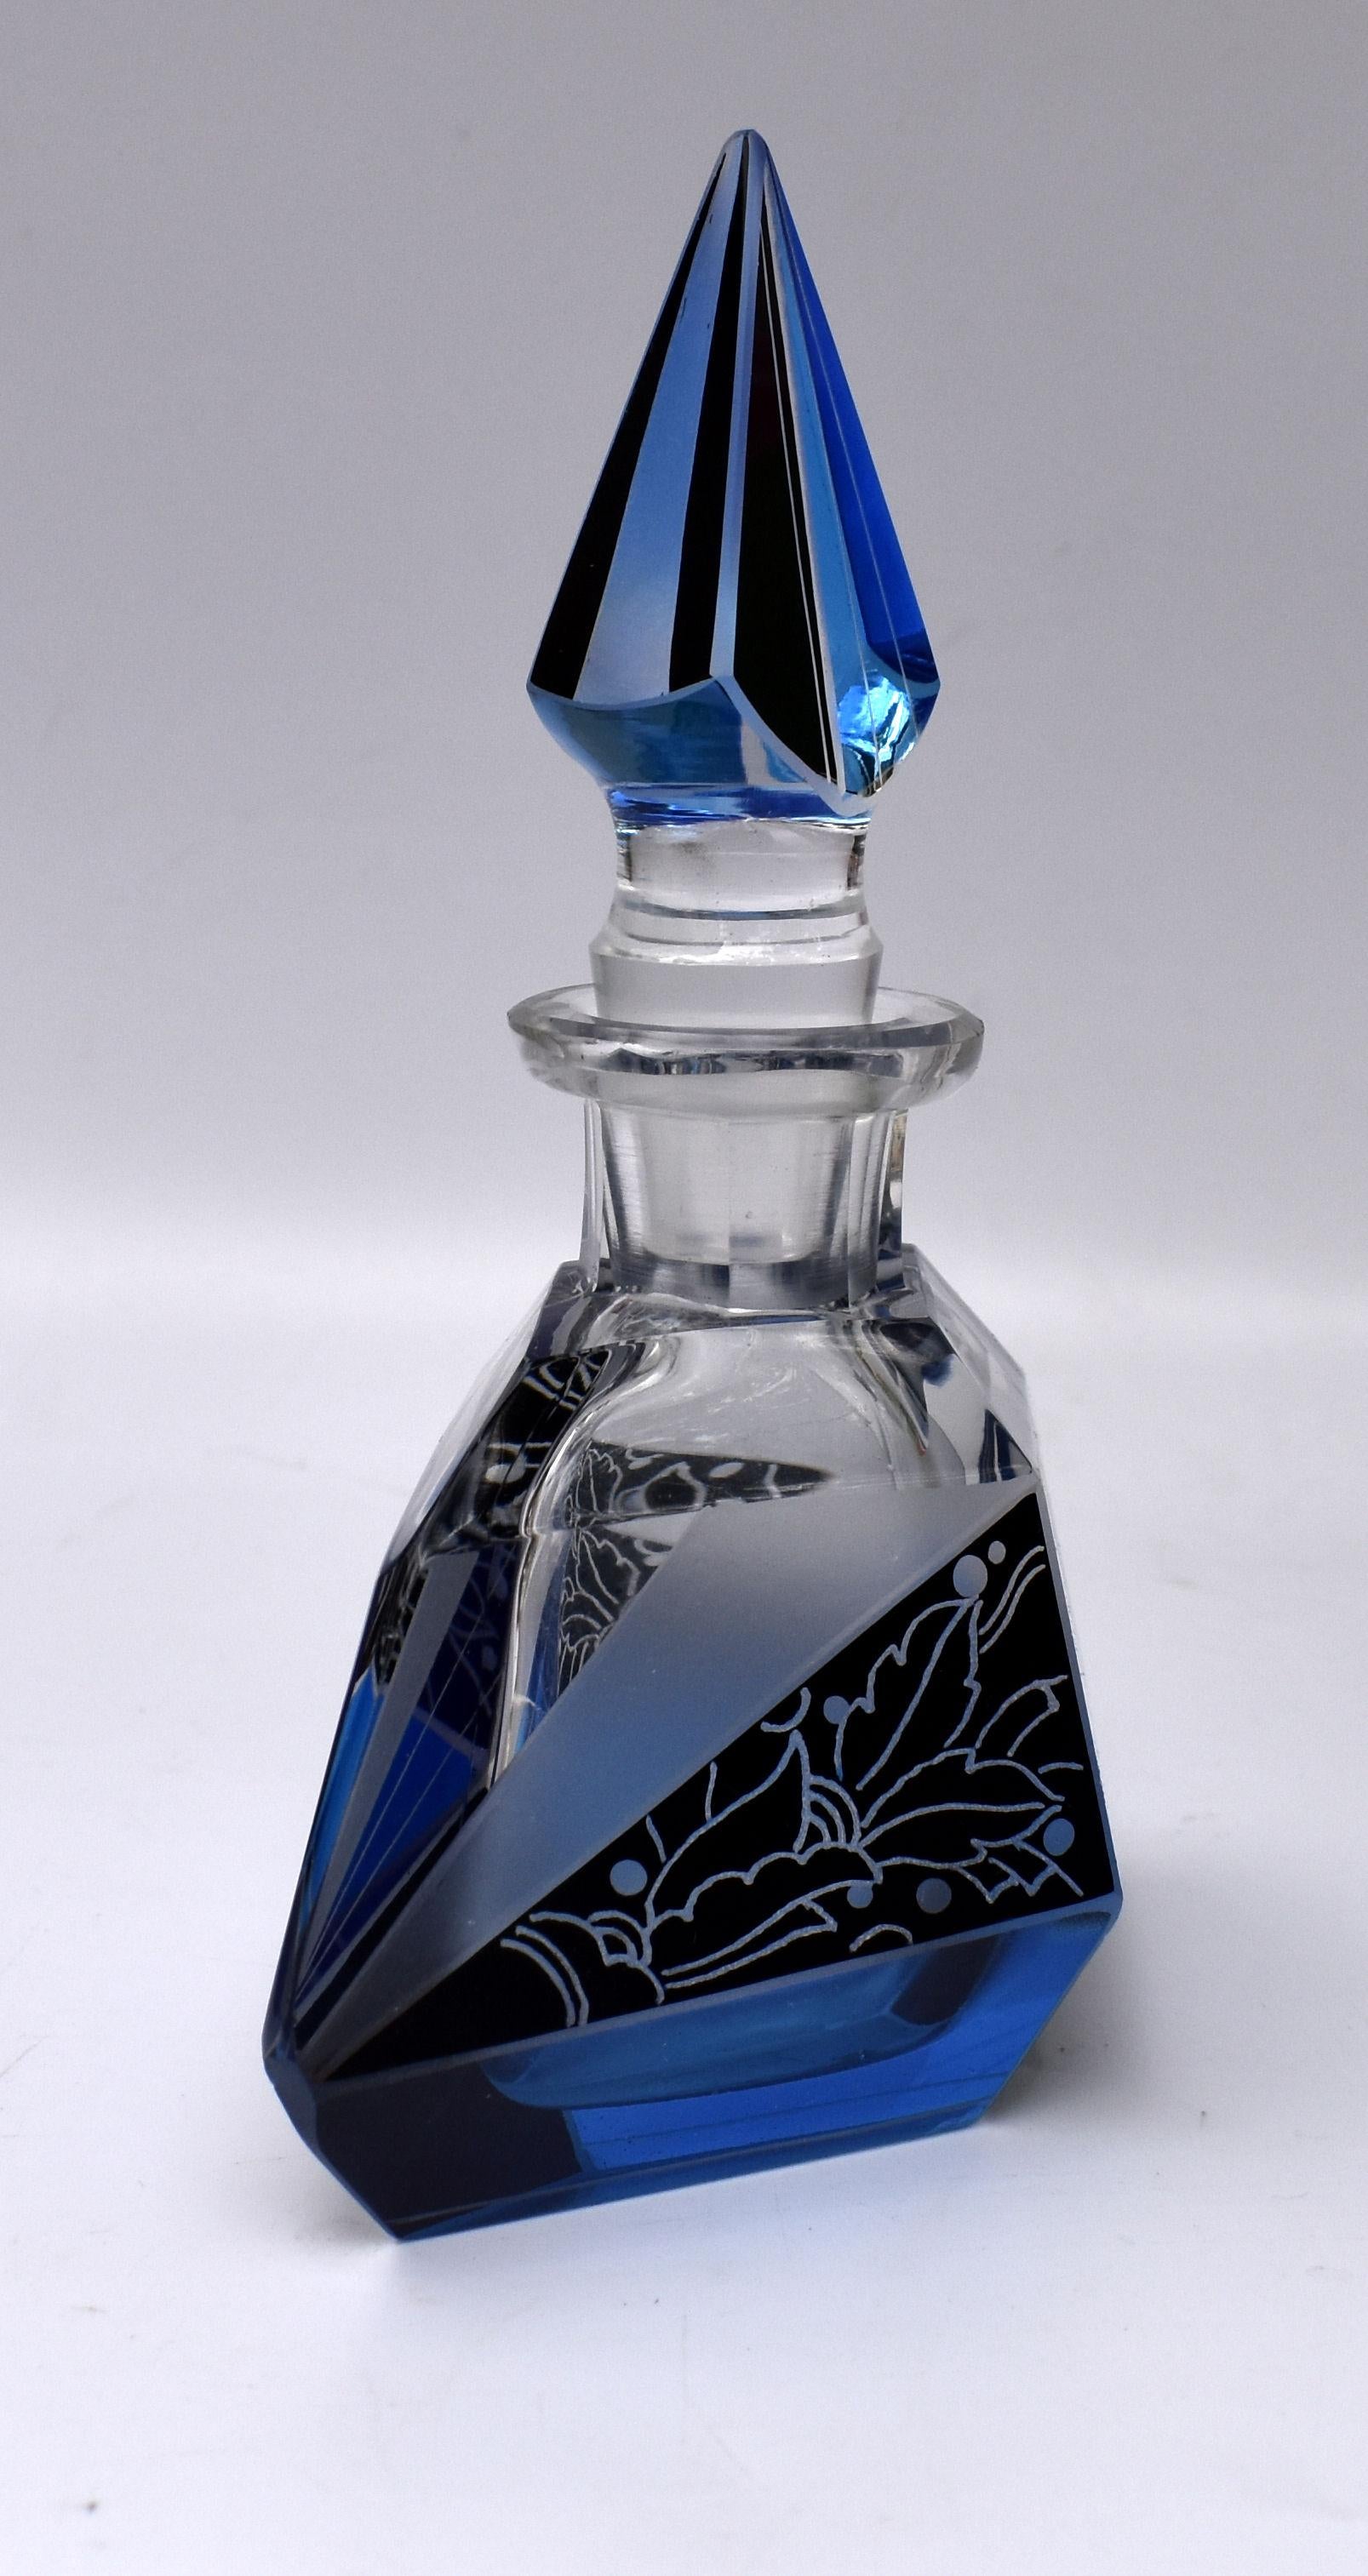 A truly beautiful Art Deco perfume bottle with a very attractive and iconic shape and patterning with geometric black enamel decoration to both the body of the bottle and stopper. Manufactured in Czech republic in the 1930s this stunning bottle is